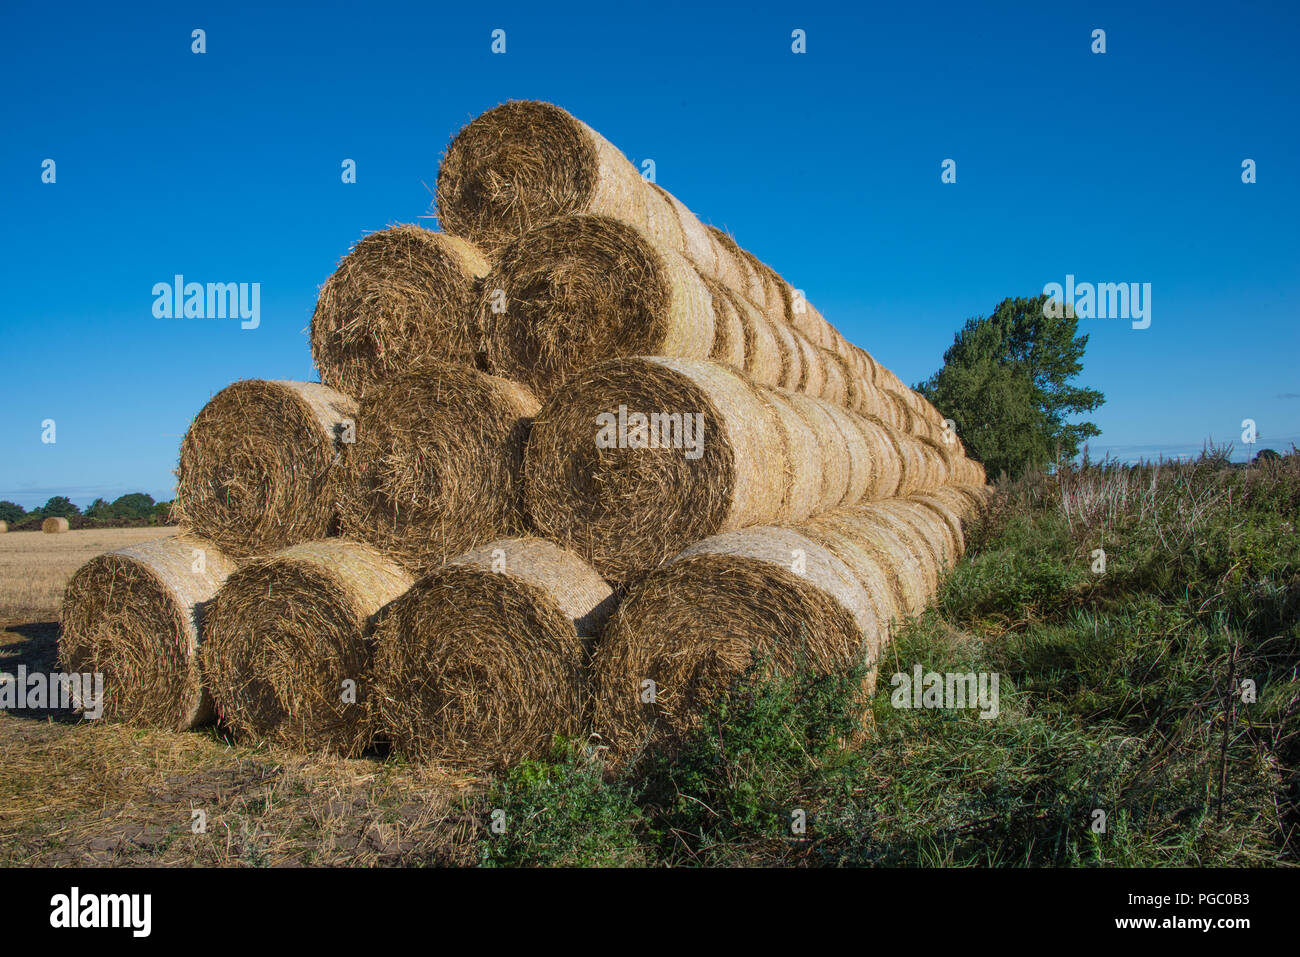 Large Round Hay Bales Stacked In The Field And Ready For Autumn After